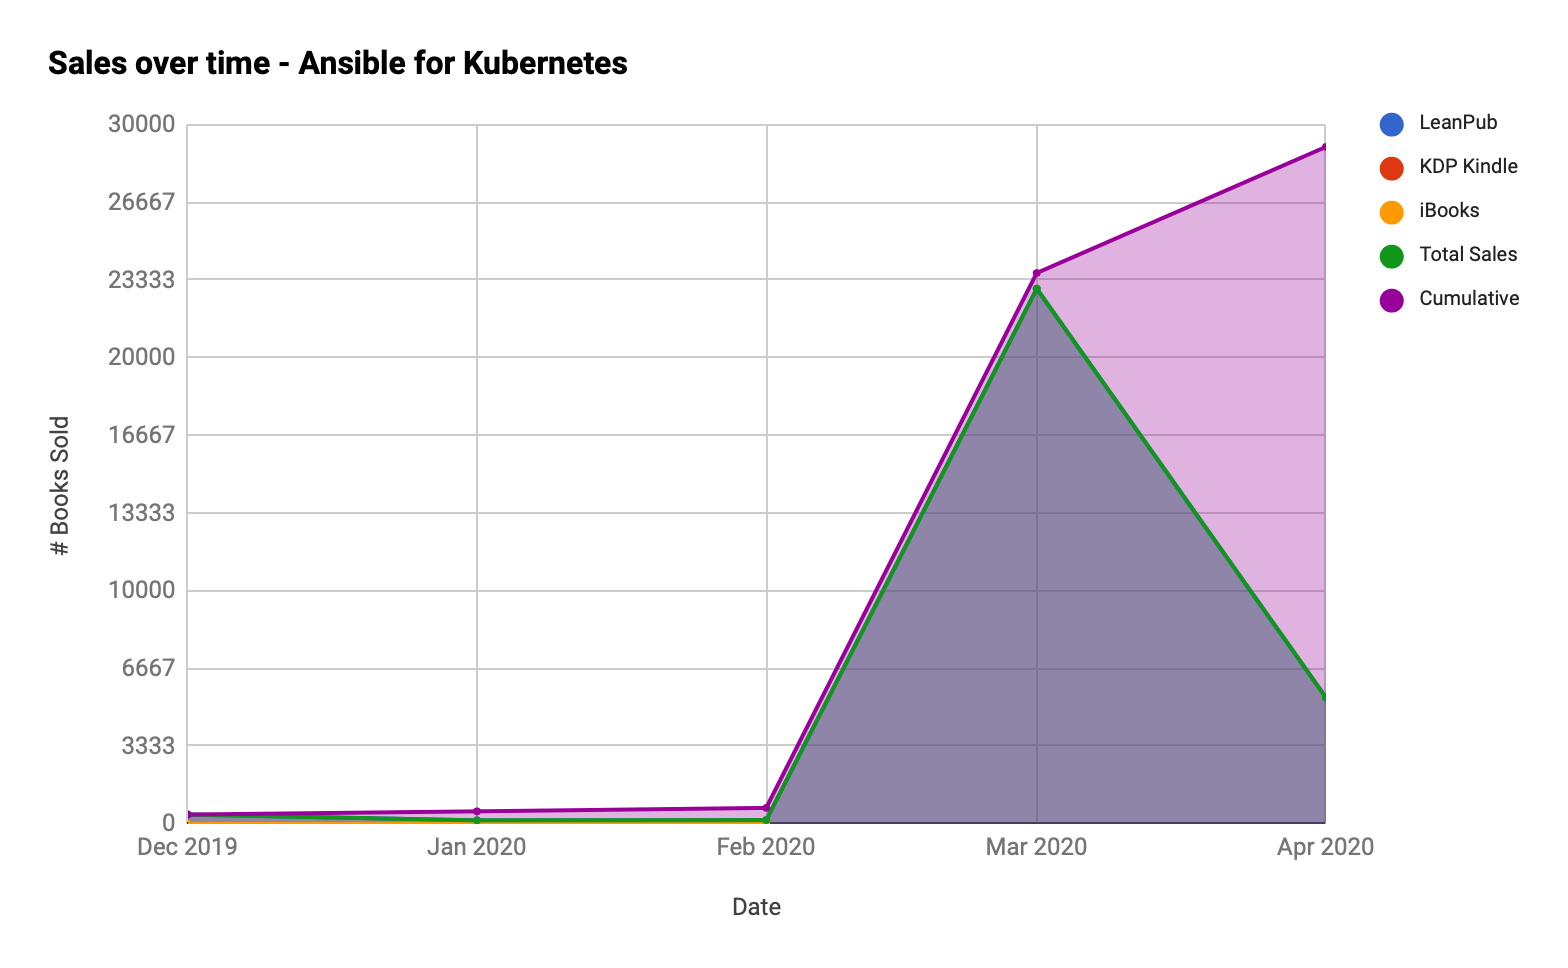 Ansible for Kubernetes - Cumulative Sales over Time